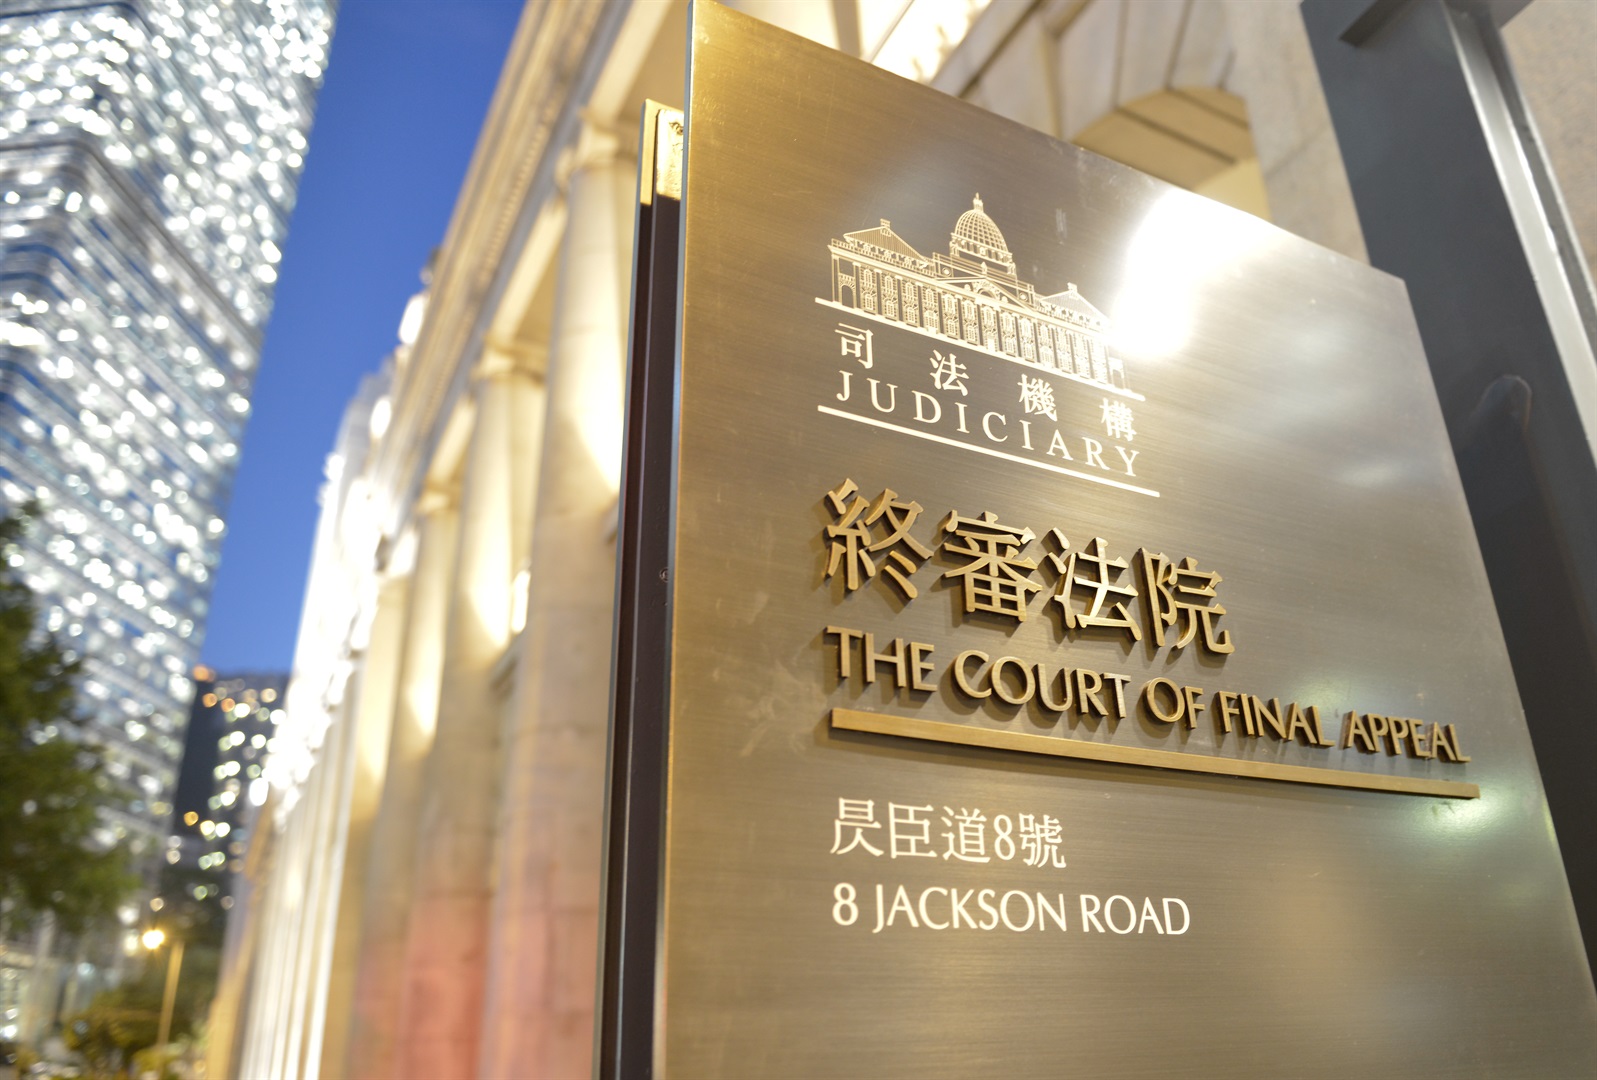 Signage of The Court of Final Appeal